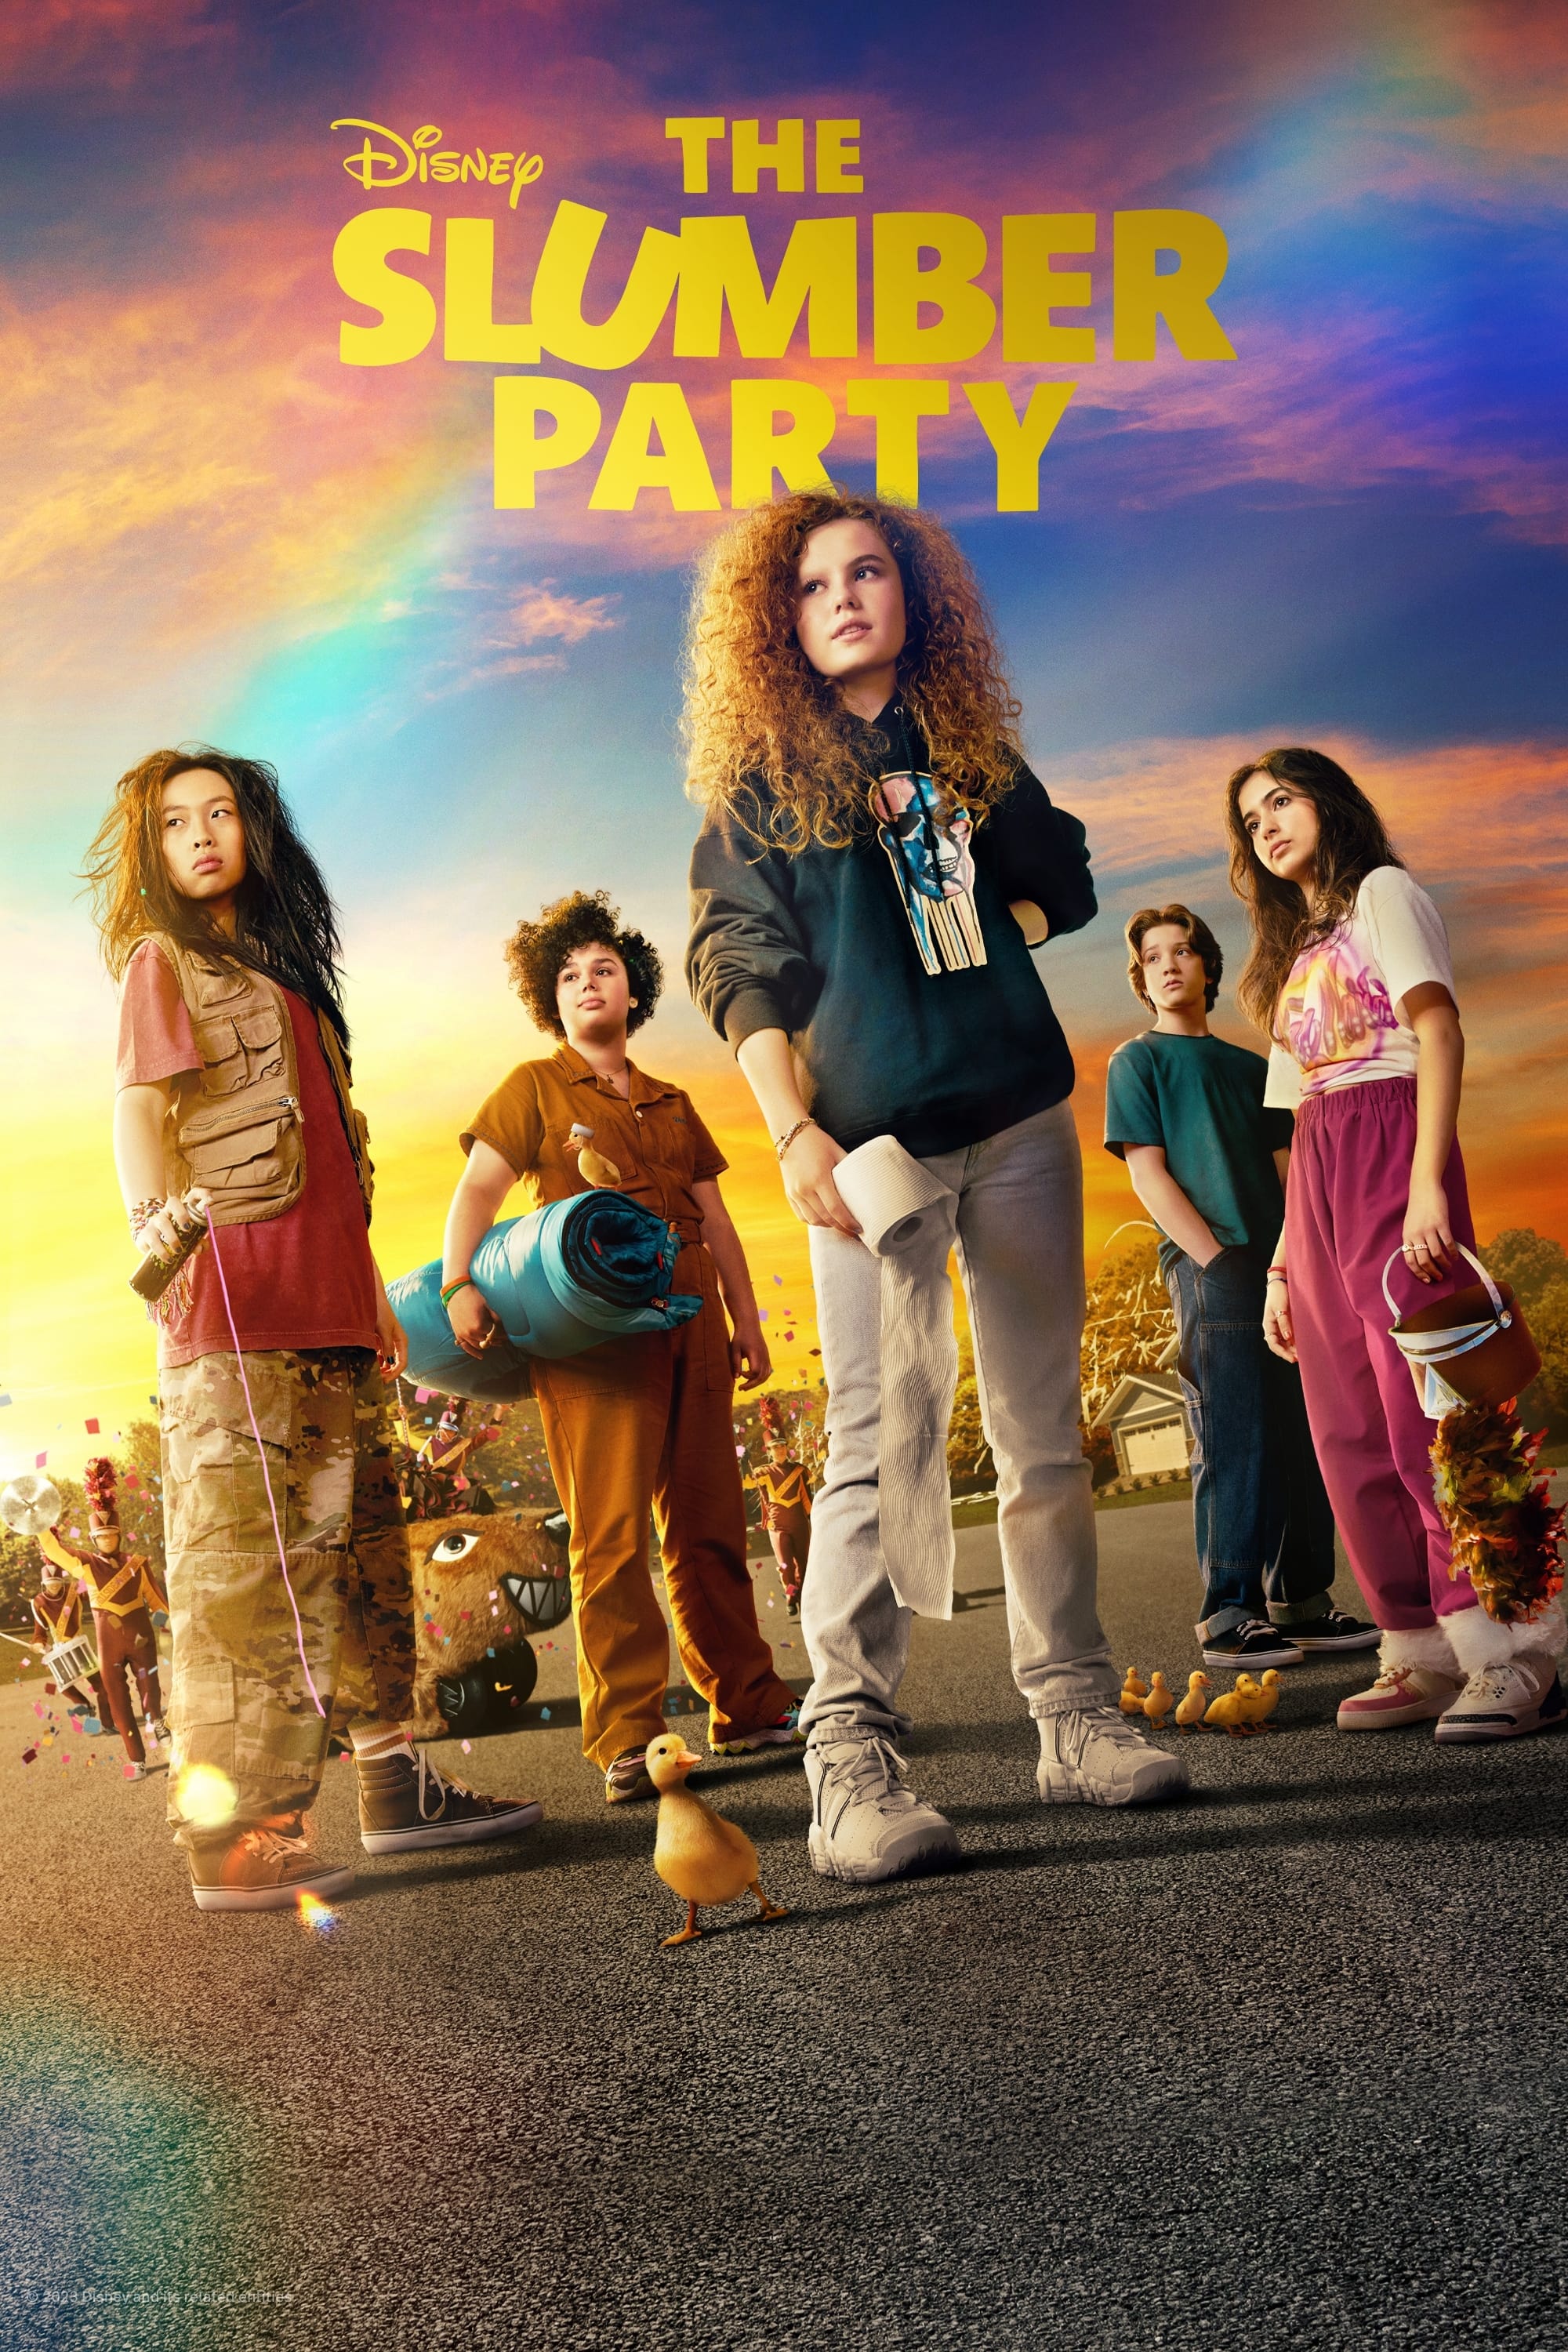 [WATCH 85+] The Slumber Party (2023) FULL MOVIE ONLINE FREE ENGLISH/Dub/SUB Comedy STREAMINGS ������ Movie Poster